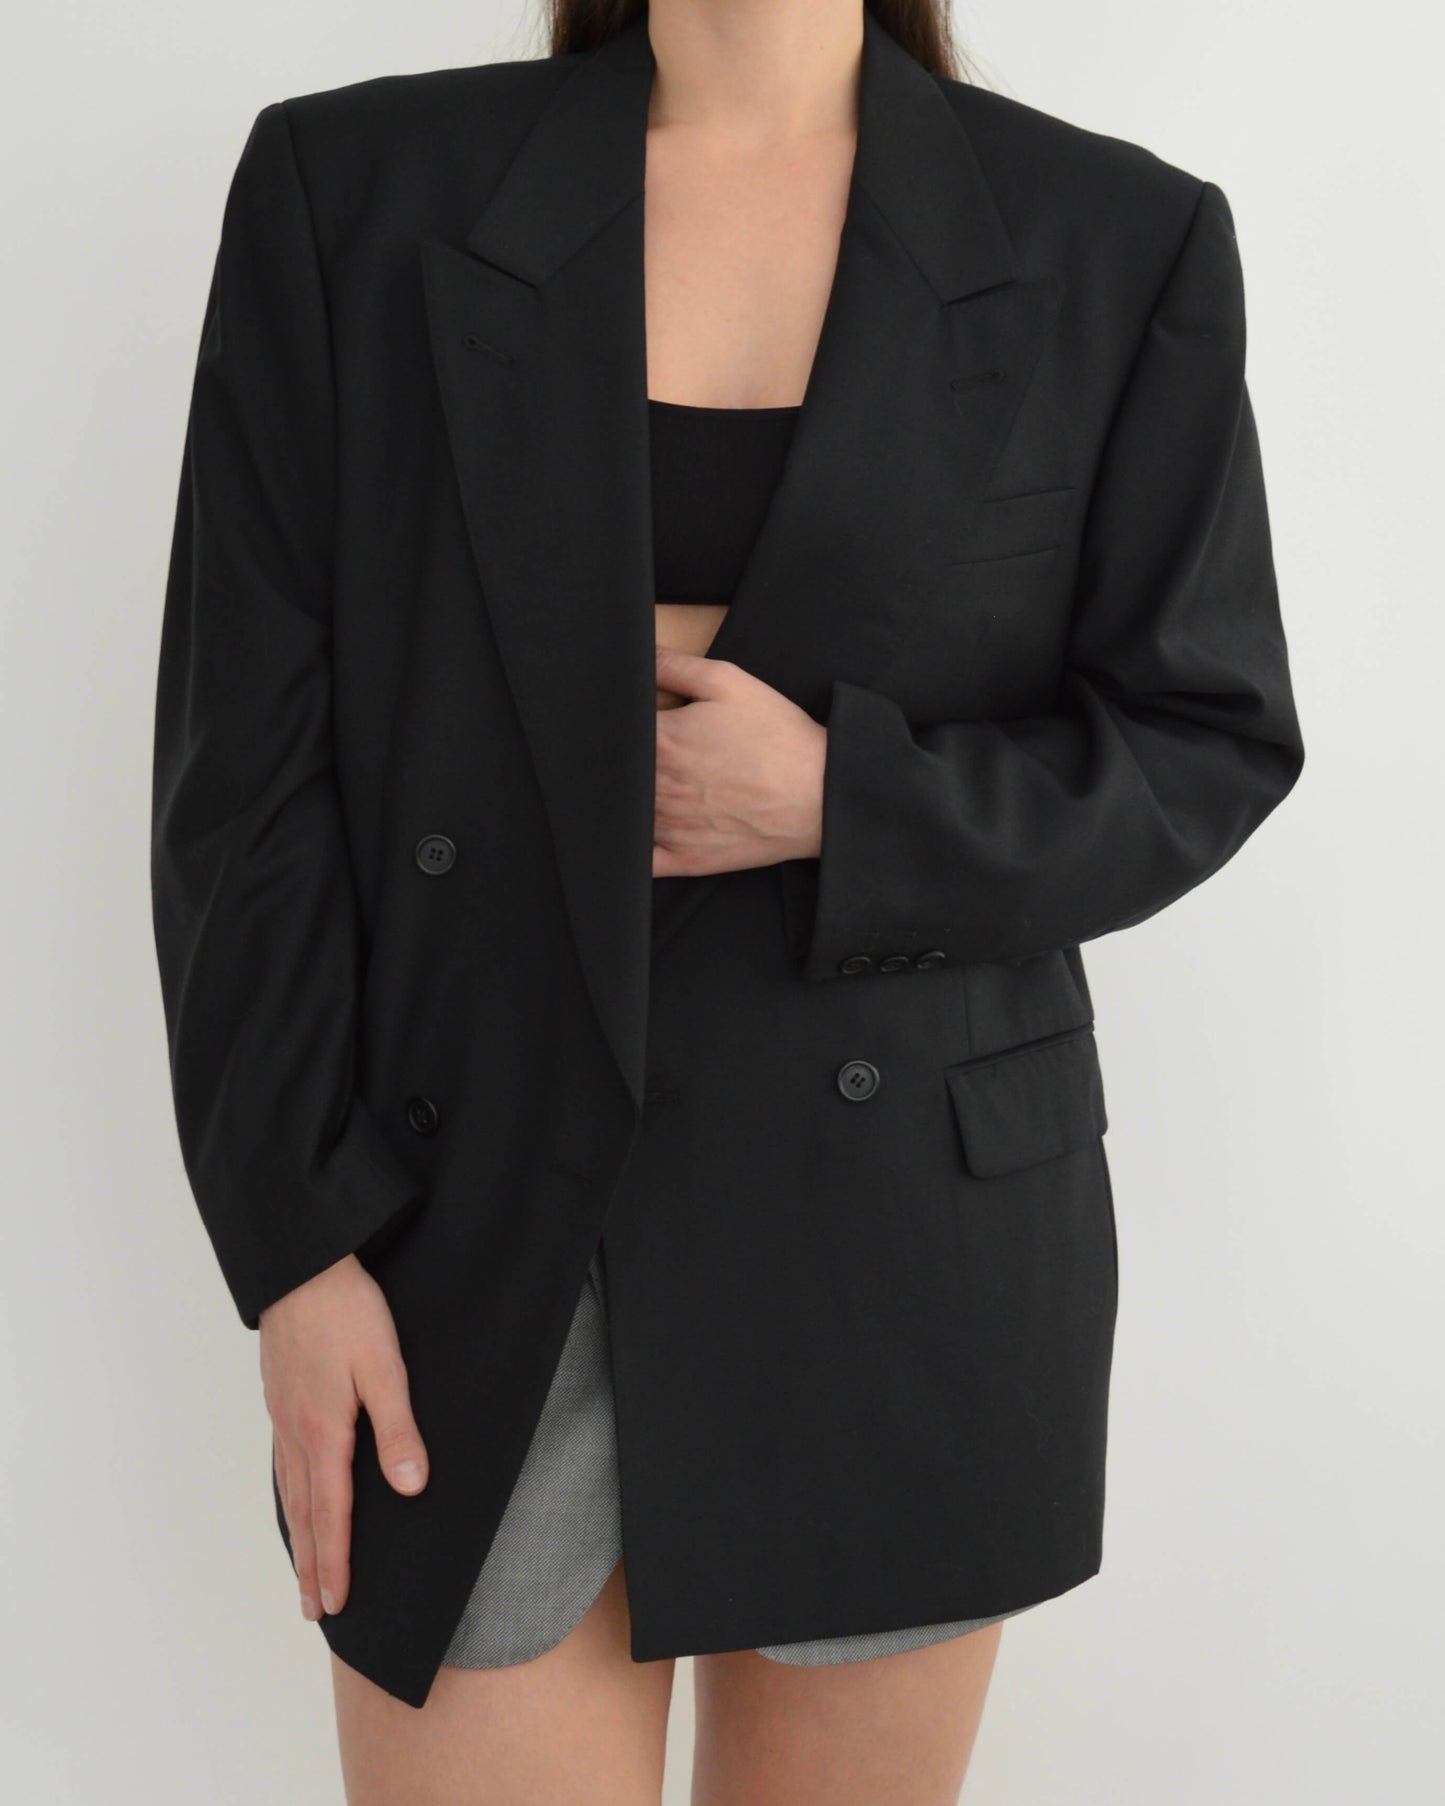 Blazer - Double Breasted Perfect Black (M/XL)